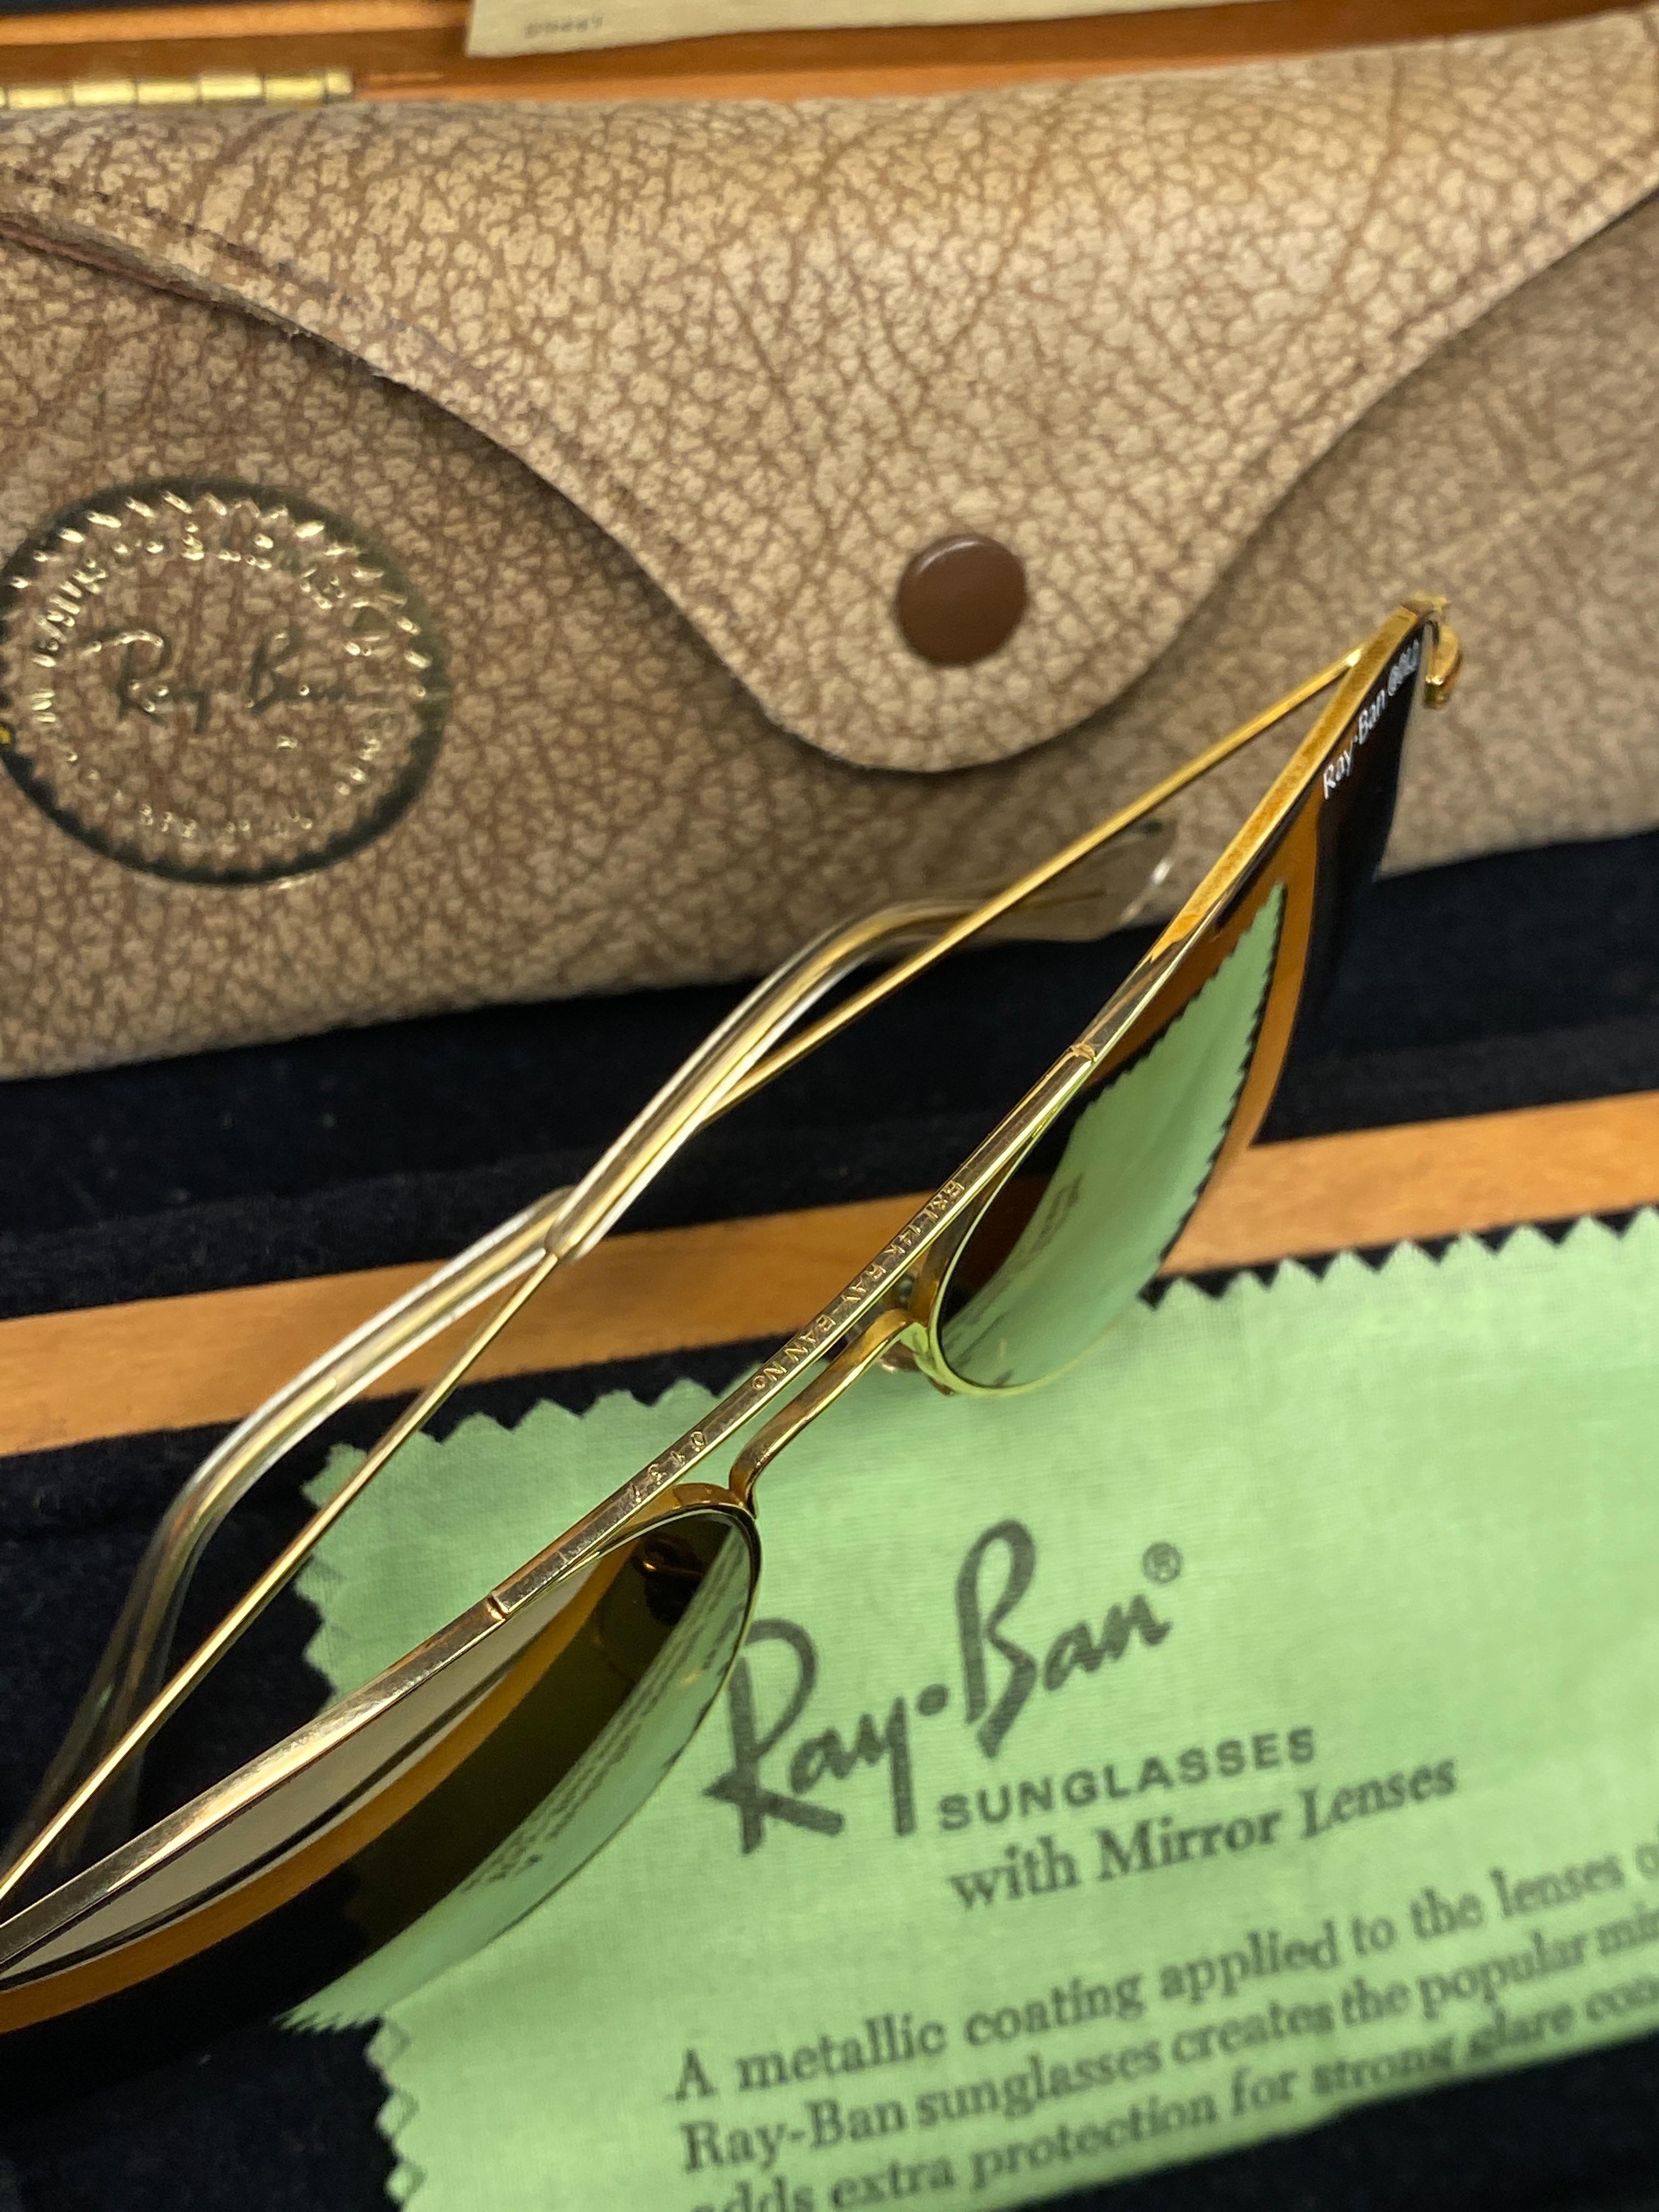 New collectors item: the Ray Ban holy grail. 1000 limited edition, ray ban 14k gold plated in 62mm. this rarity is number 0137 out of 1000.

Made in Germany. 

Full set consisting in Ray Ban hard wood case  with soft dark inside padding, the